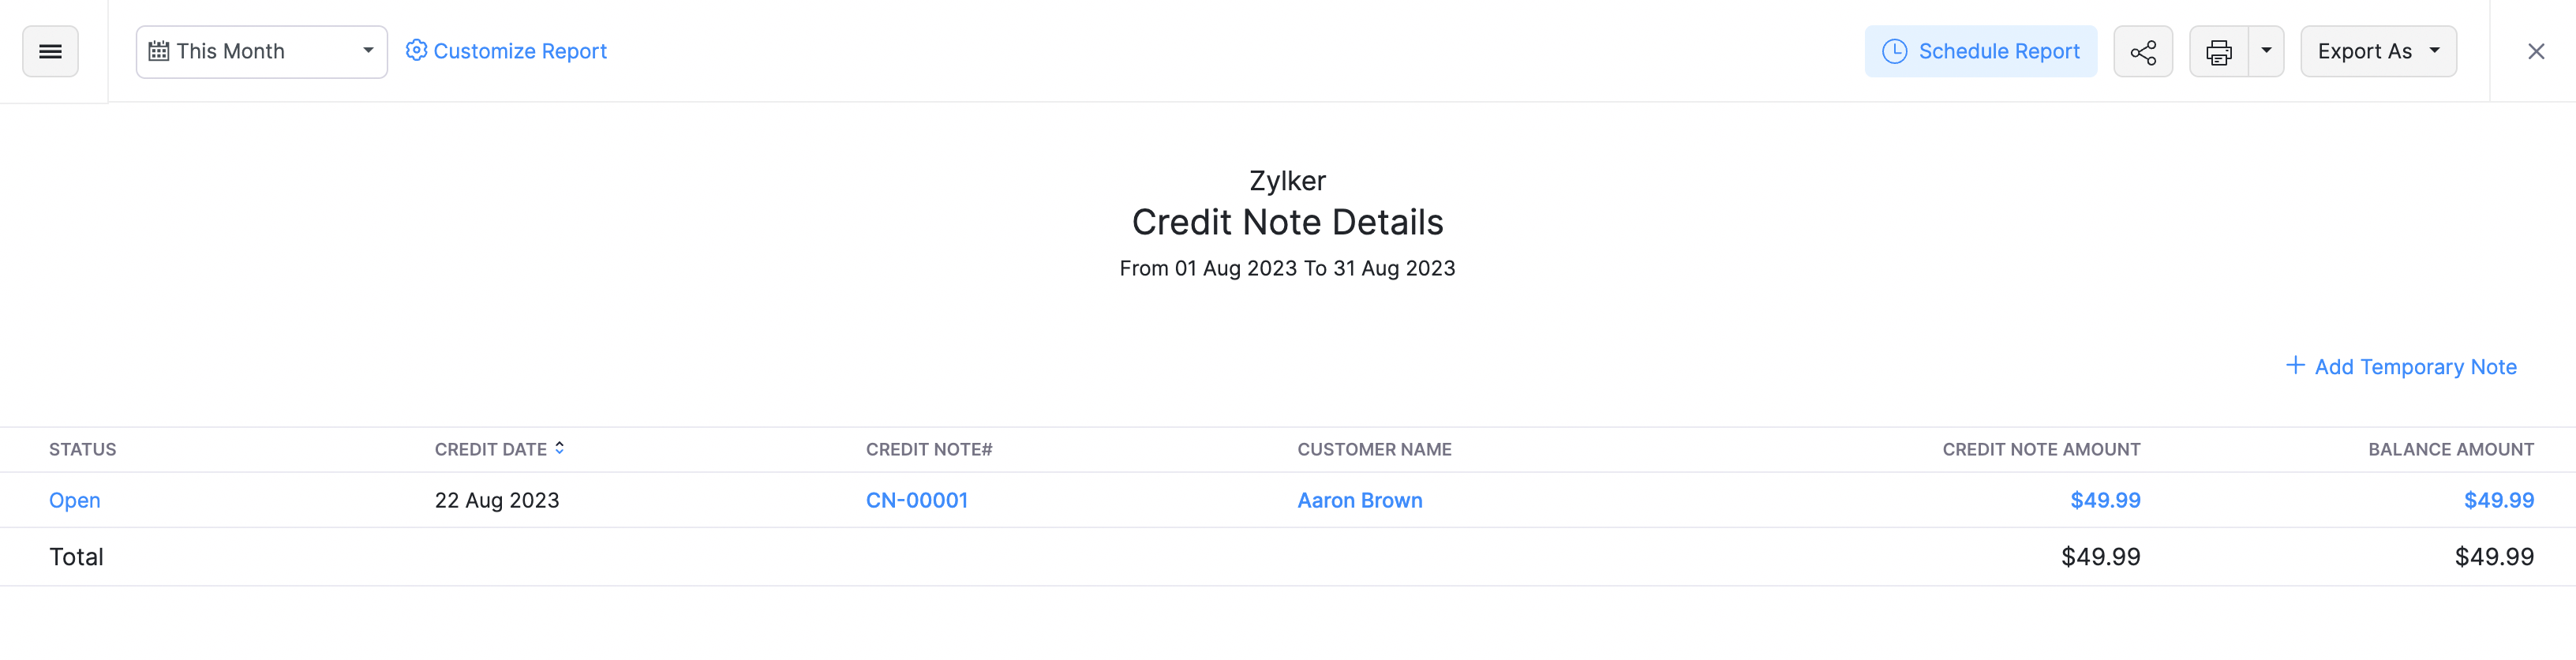 Credit Note Details Report